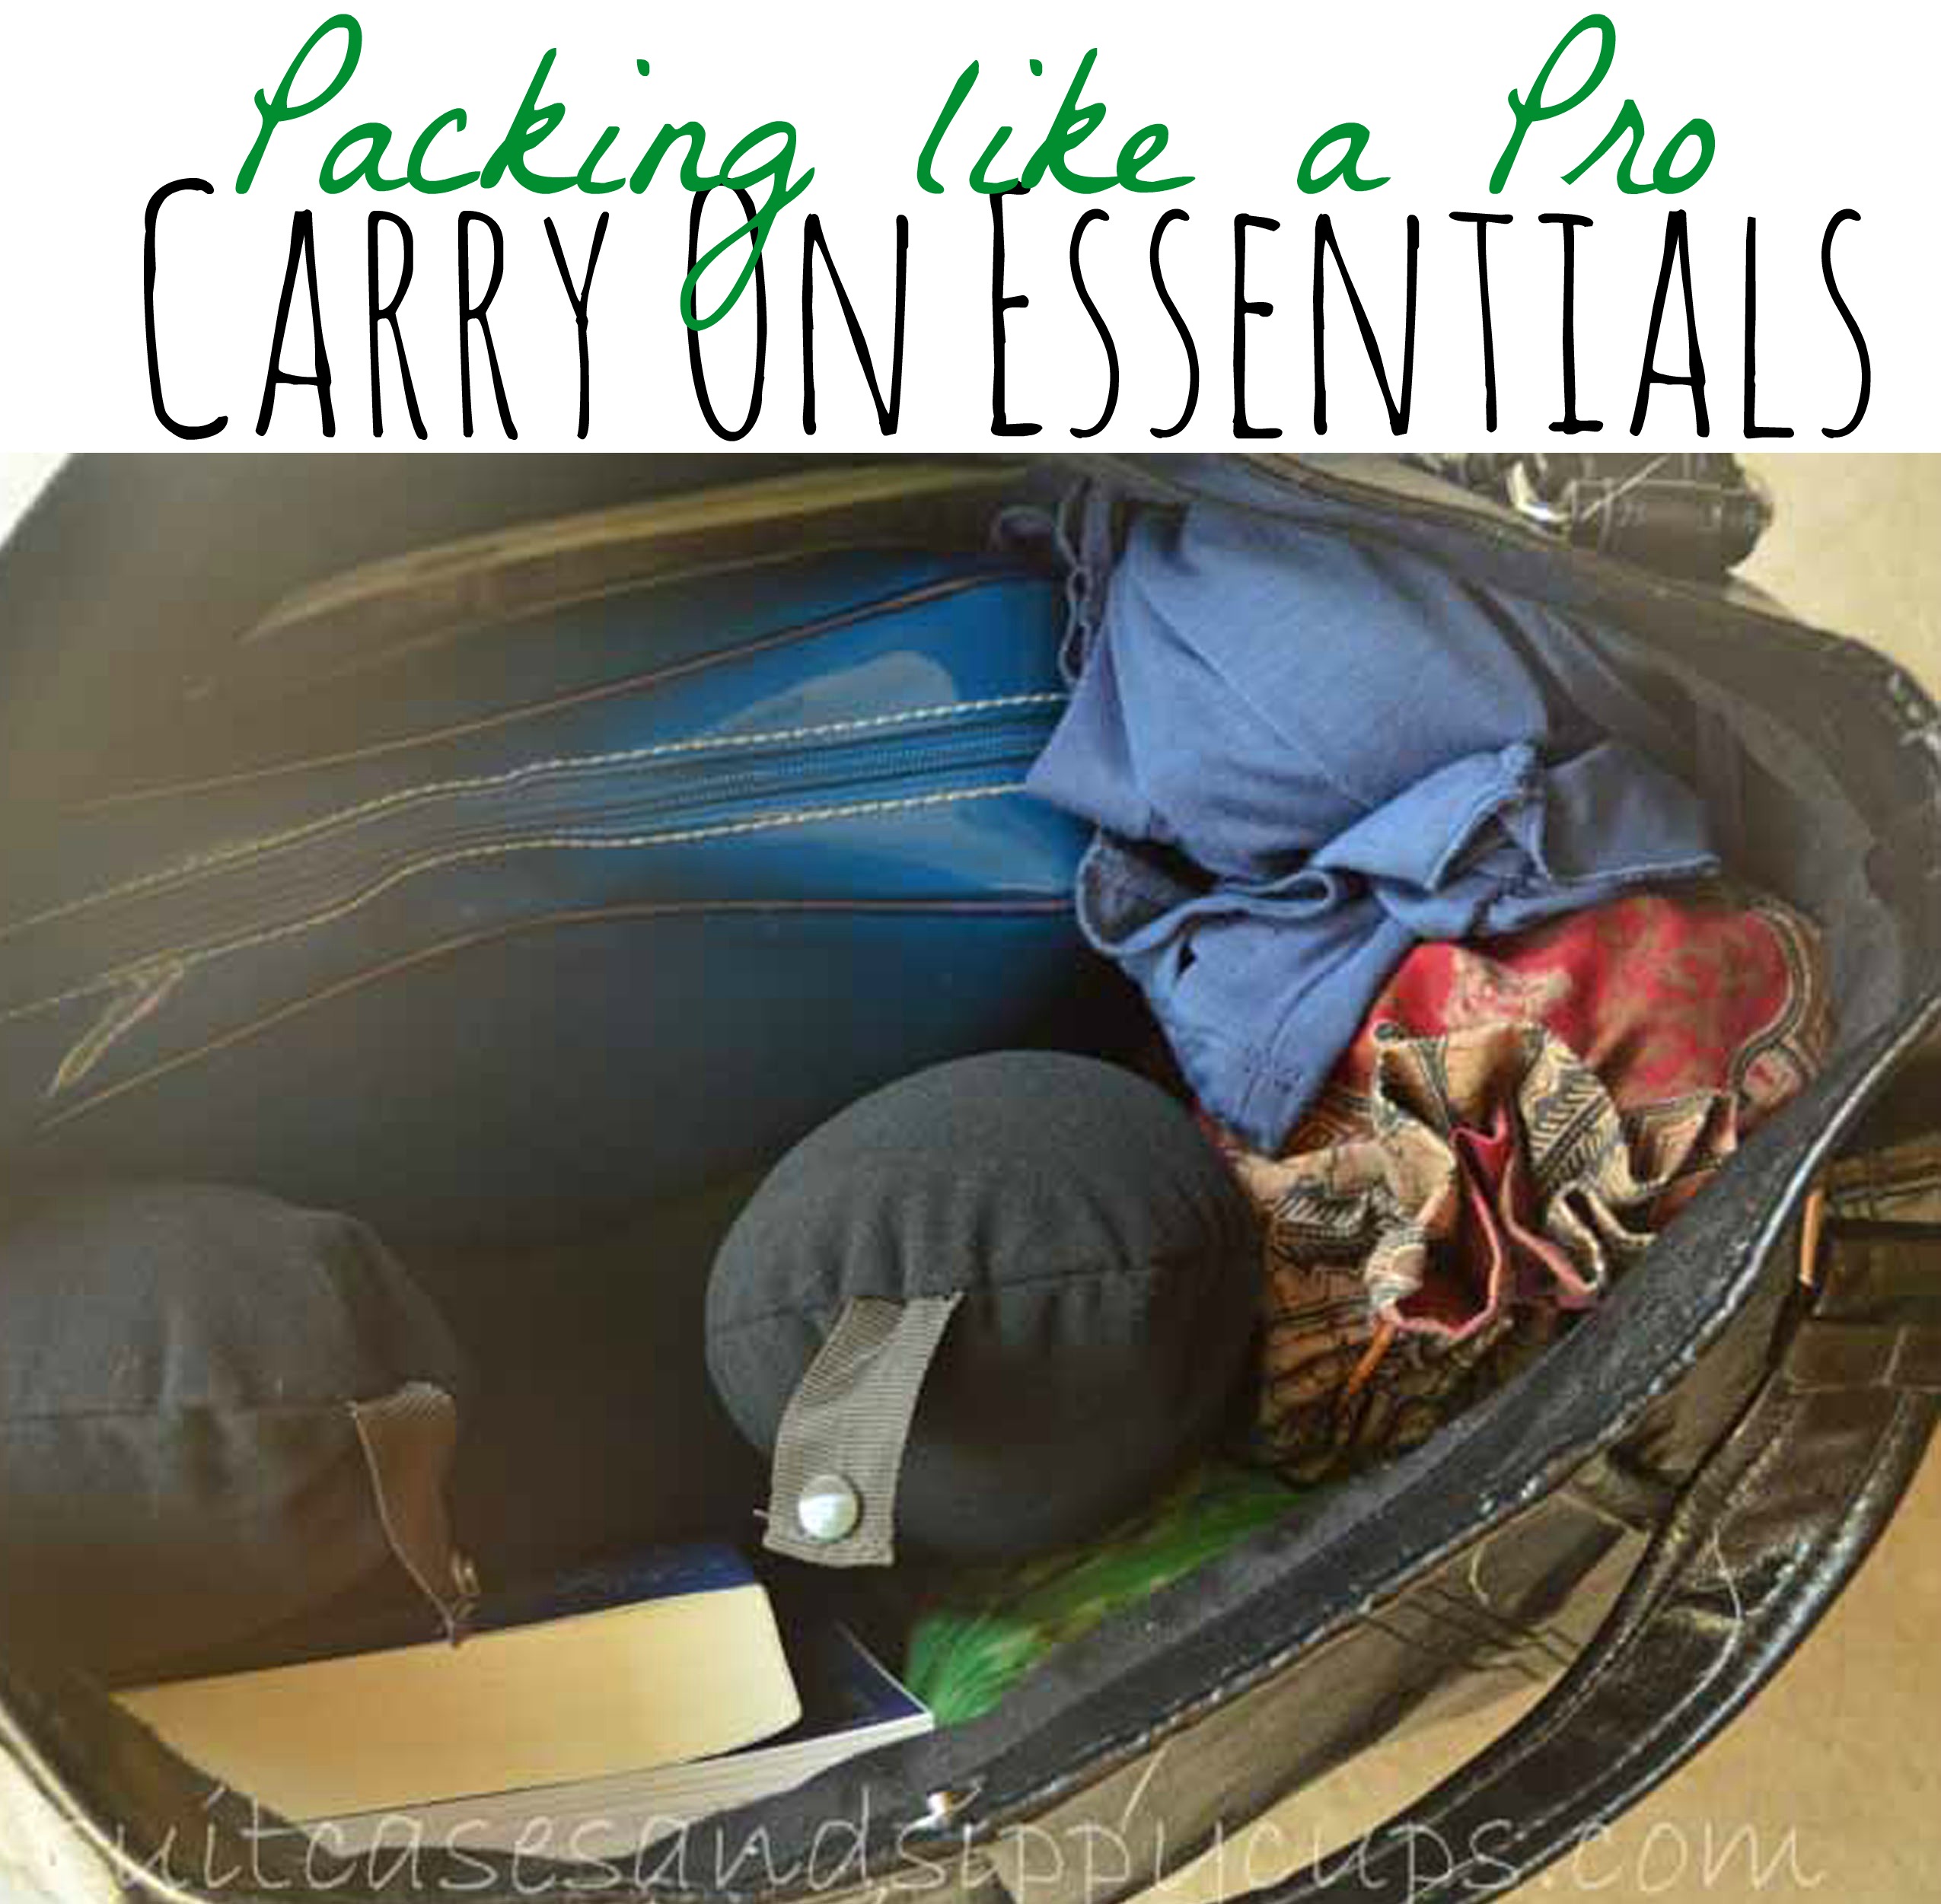 Pro Packing Tips: Carry-On Essentials for an International Flight - test